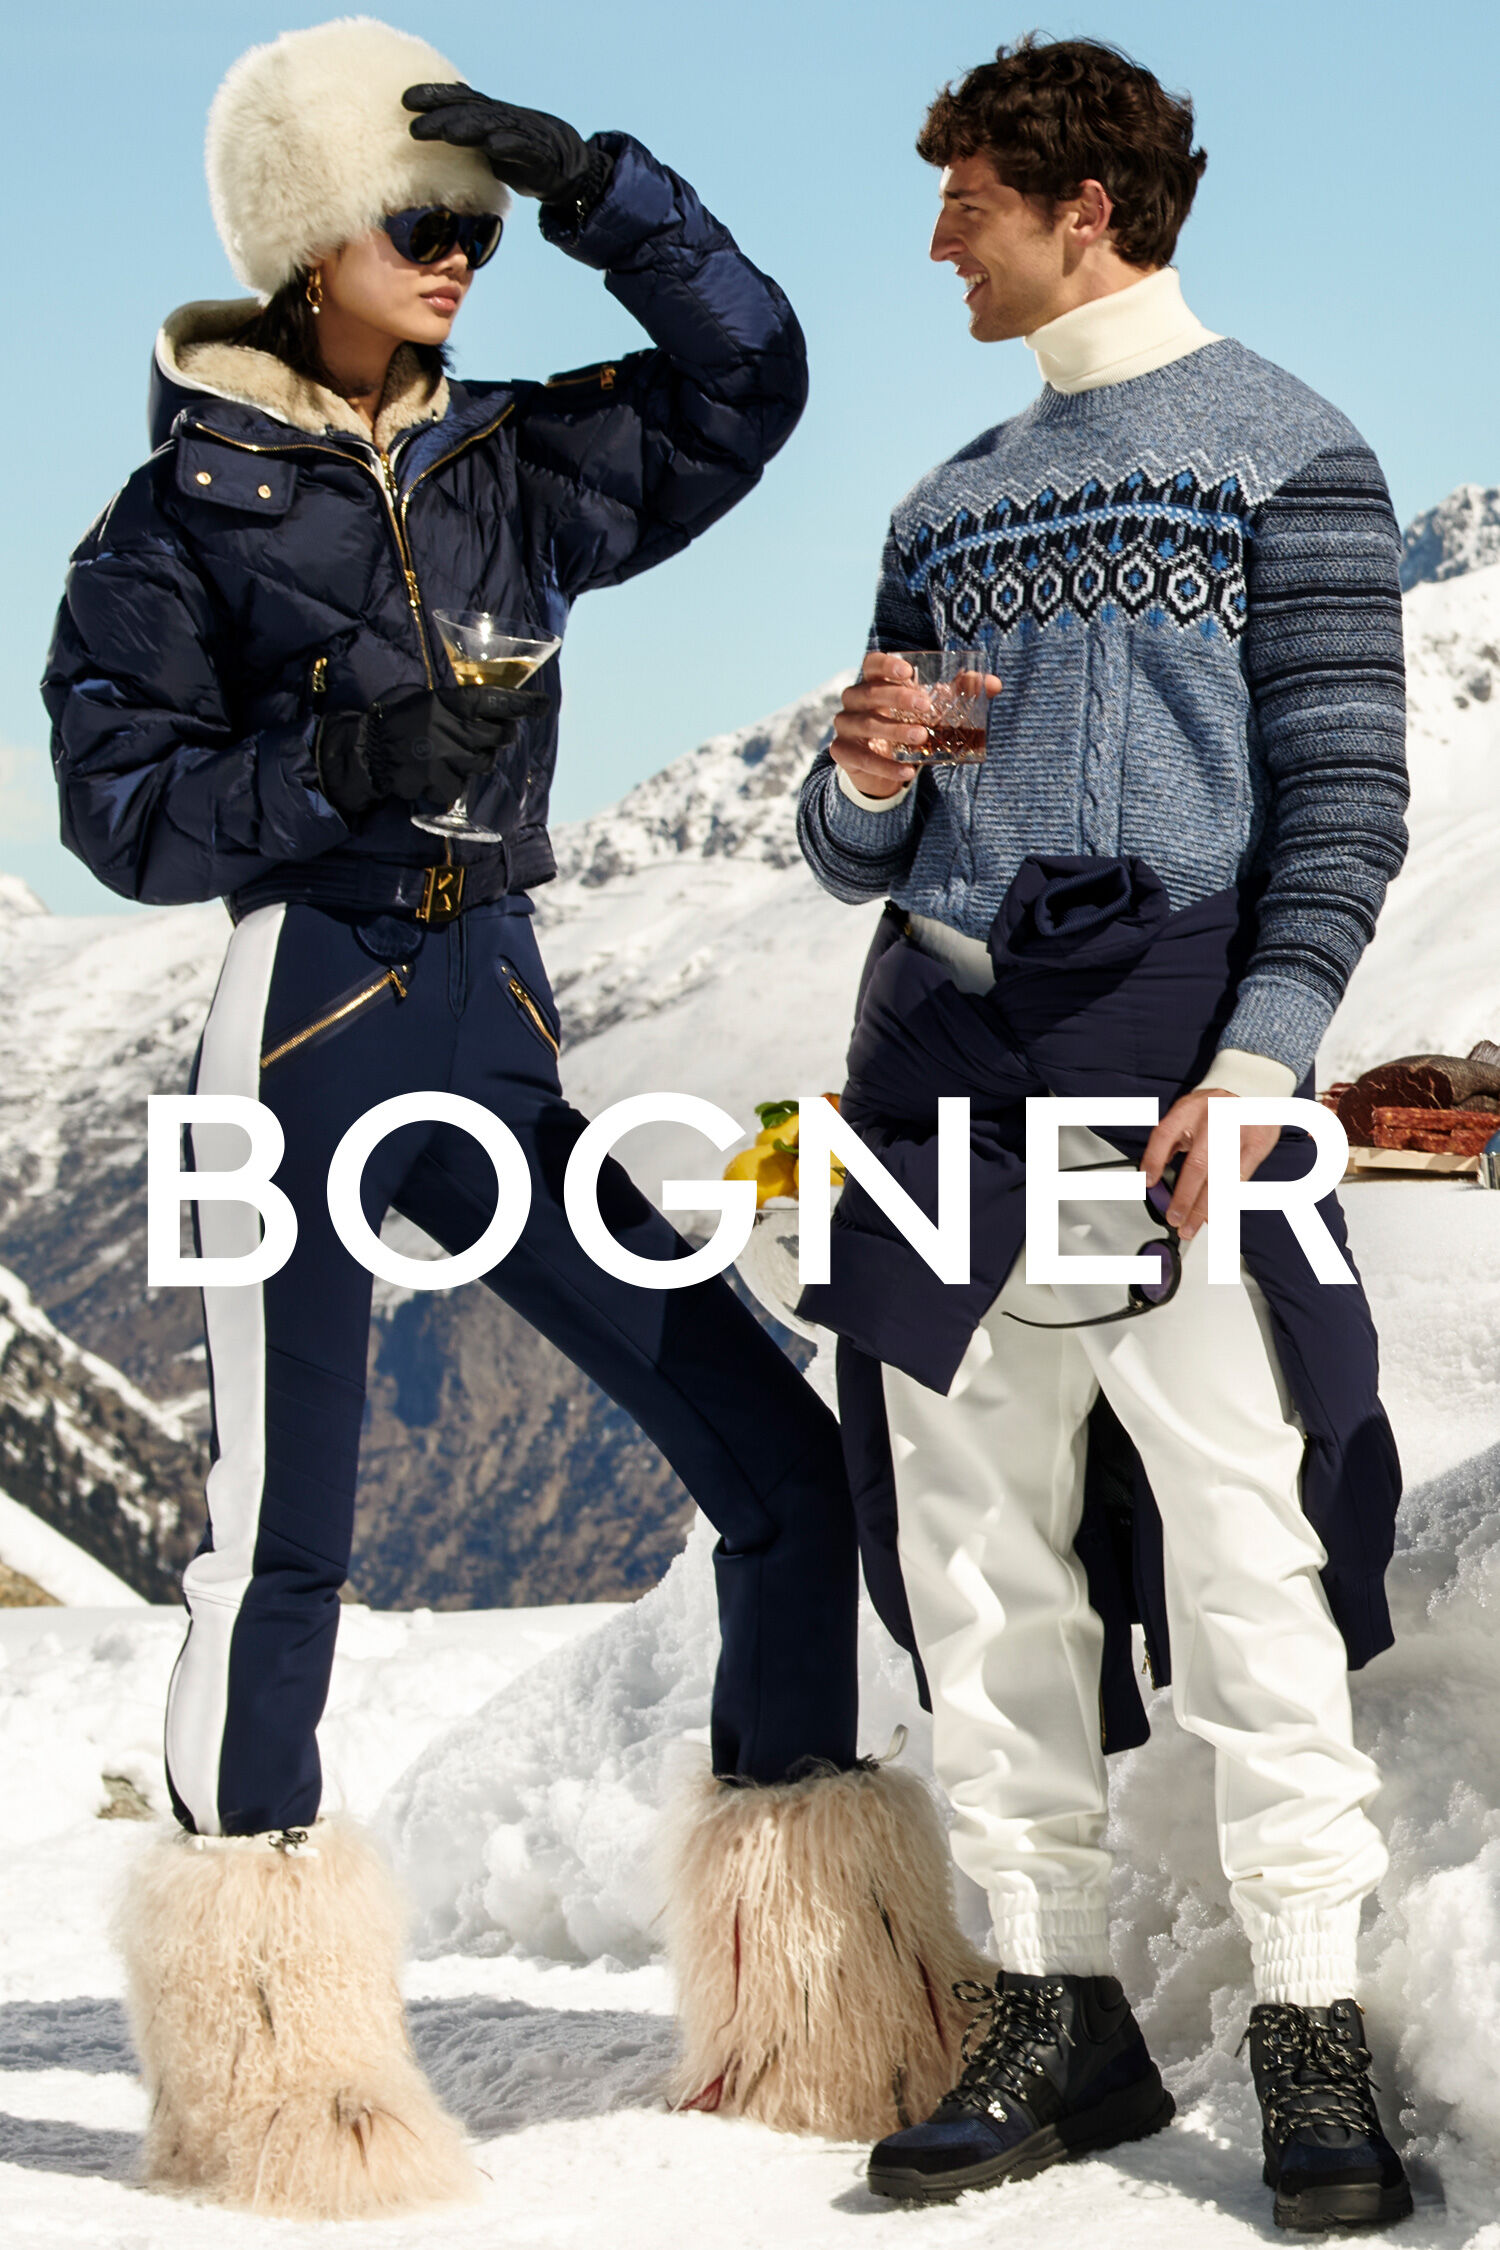 More about the BOGNER and FIRE+ICE collections